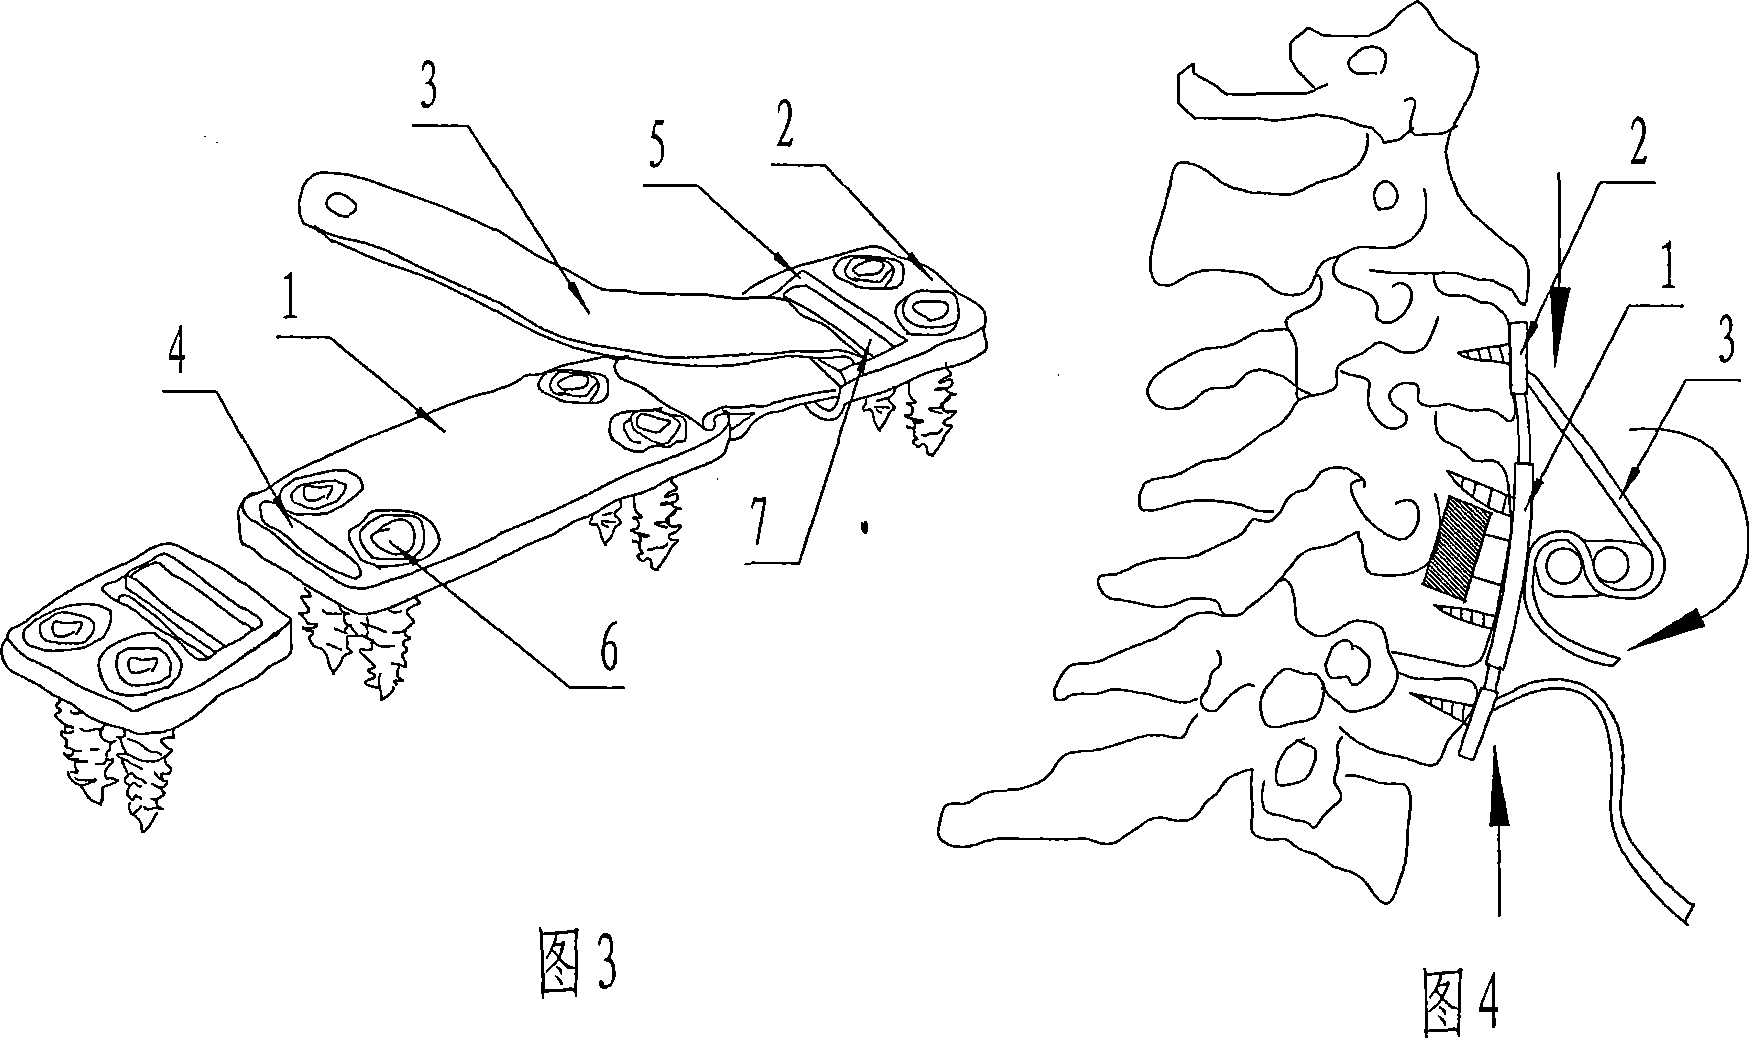 System for fixing anterior cervical and capable of preventing overcompensation movement